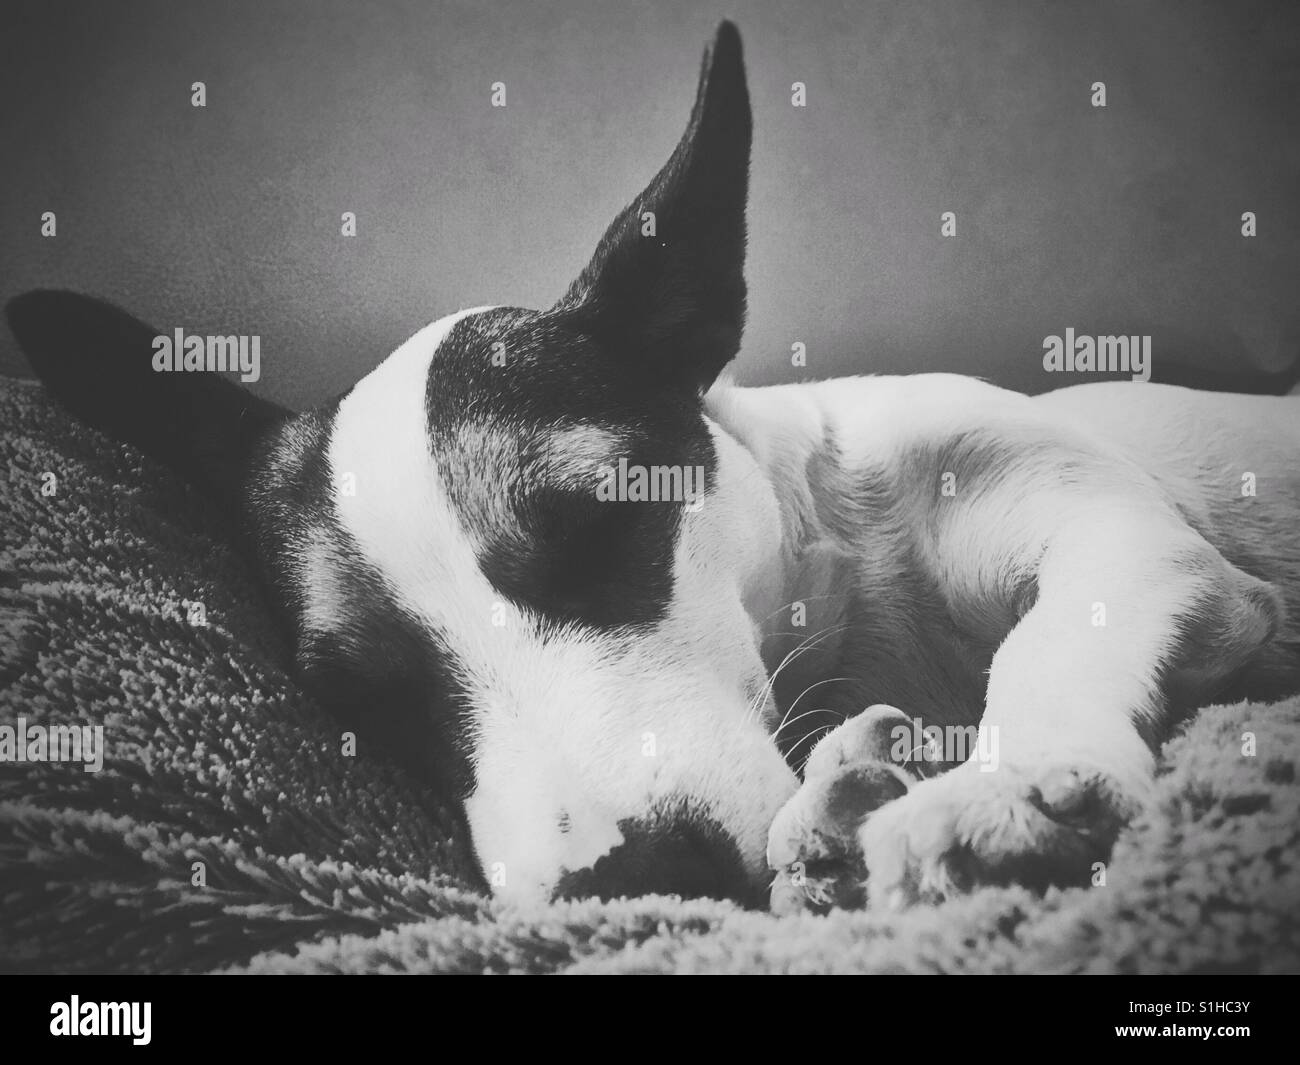 Jack Russell Terrier dog sleeping. Black and white edit. Stock Photo